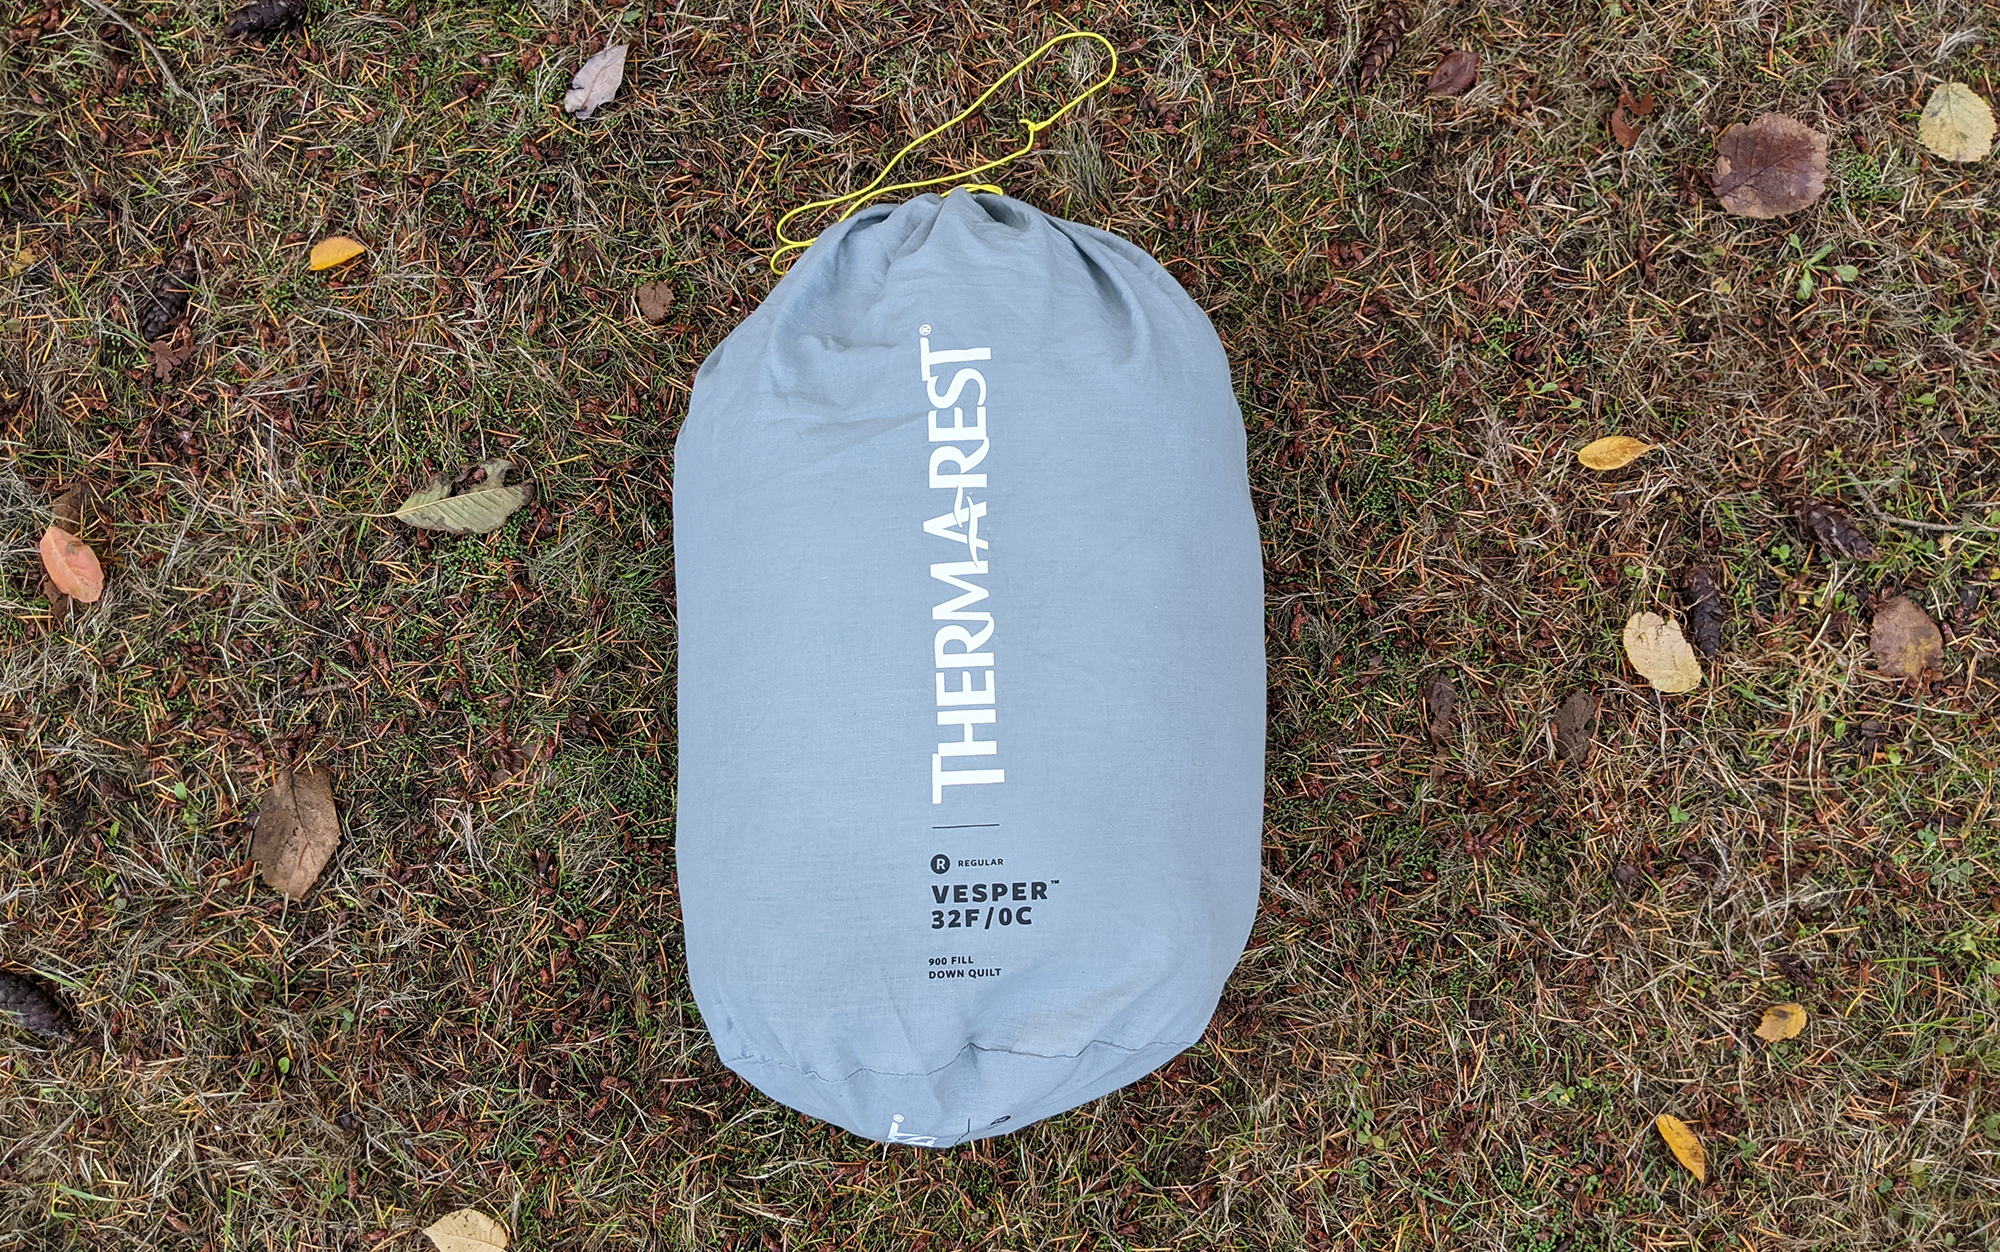 The Therm A Rest Vesper quilt is in a storage bag.